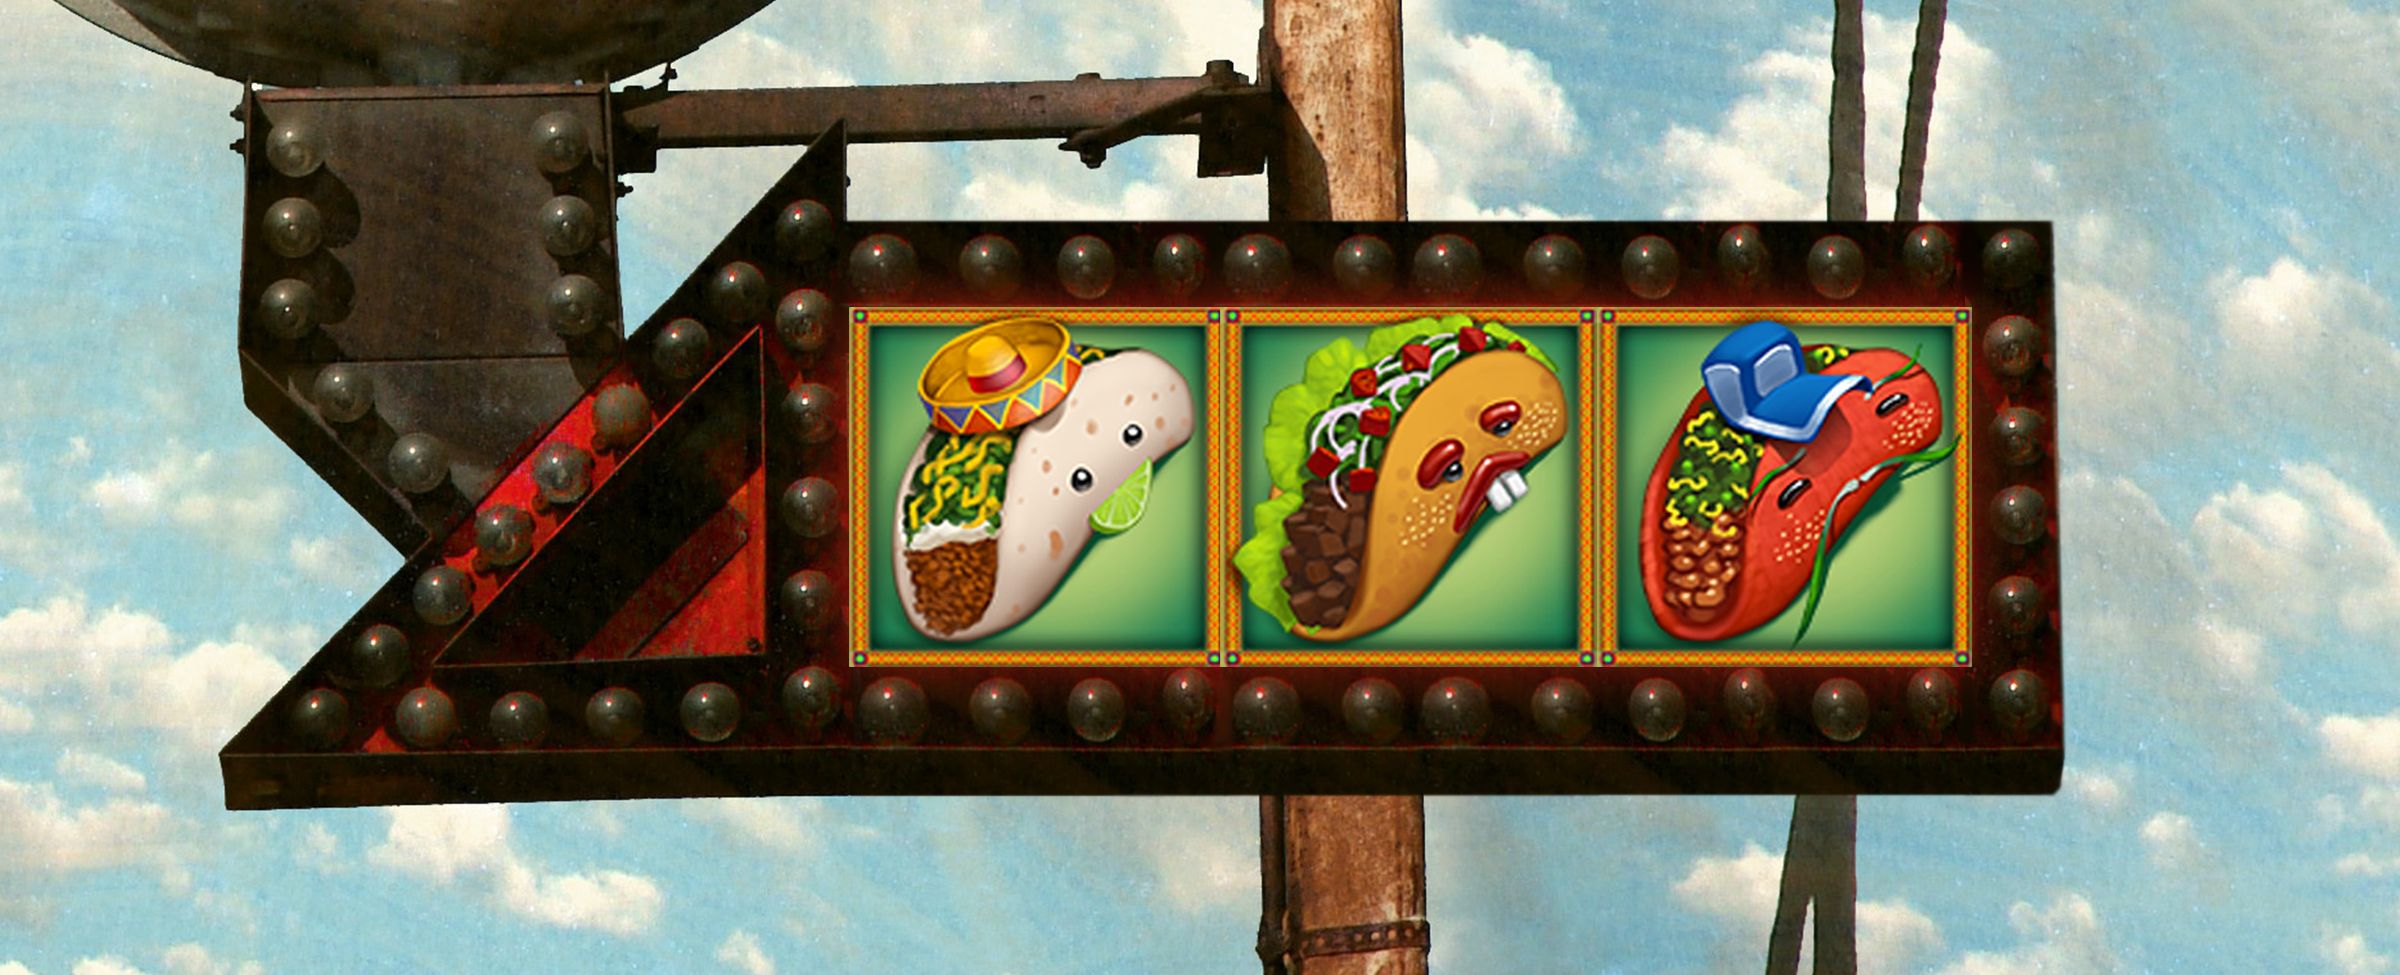 A thick steel industrial-style studded sign is pictured prominently, with three illustrations of Mexican tacos in white, yellow, and red - all from the Cafe Casino slot game, Amigos Fiesta. In the background is a slightly cloudy blue sky, with two thin palm tree trunks in the middle.